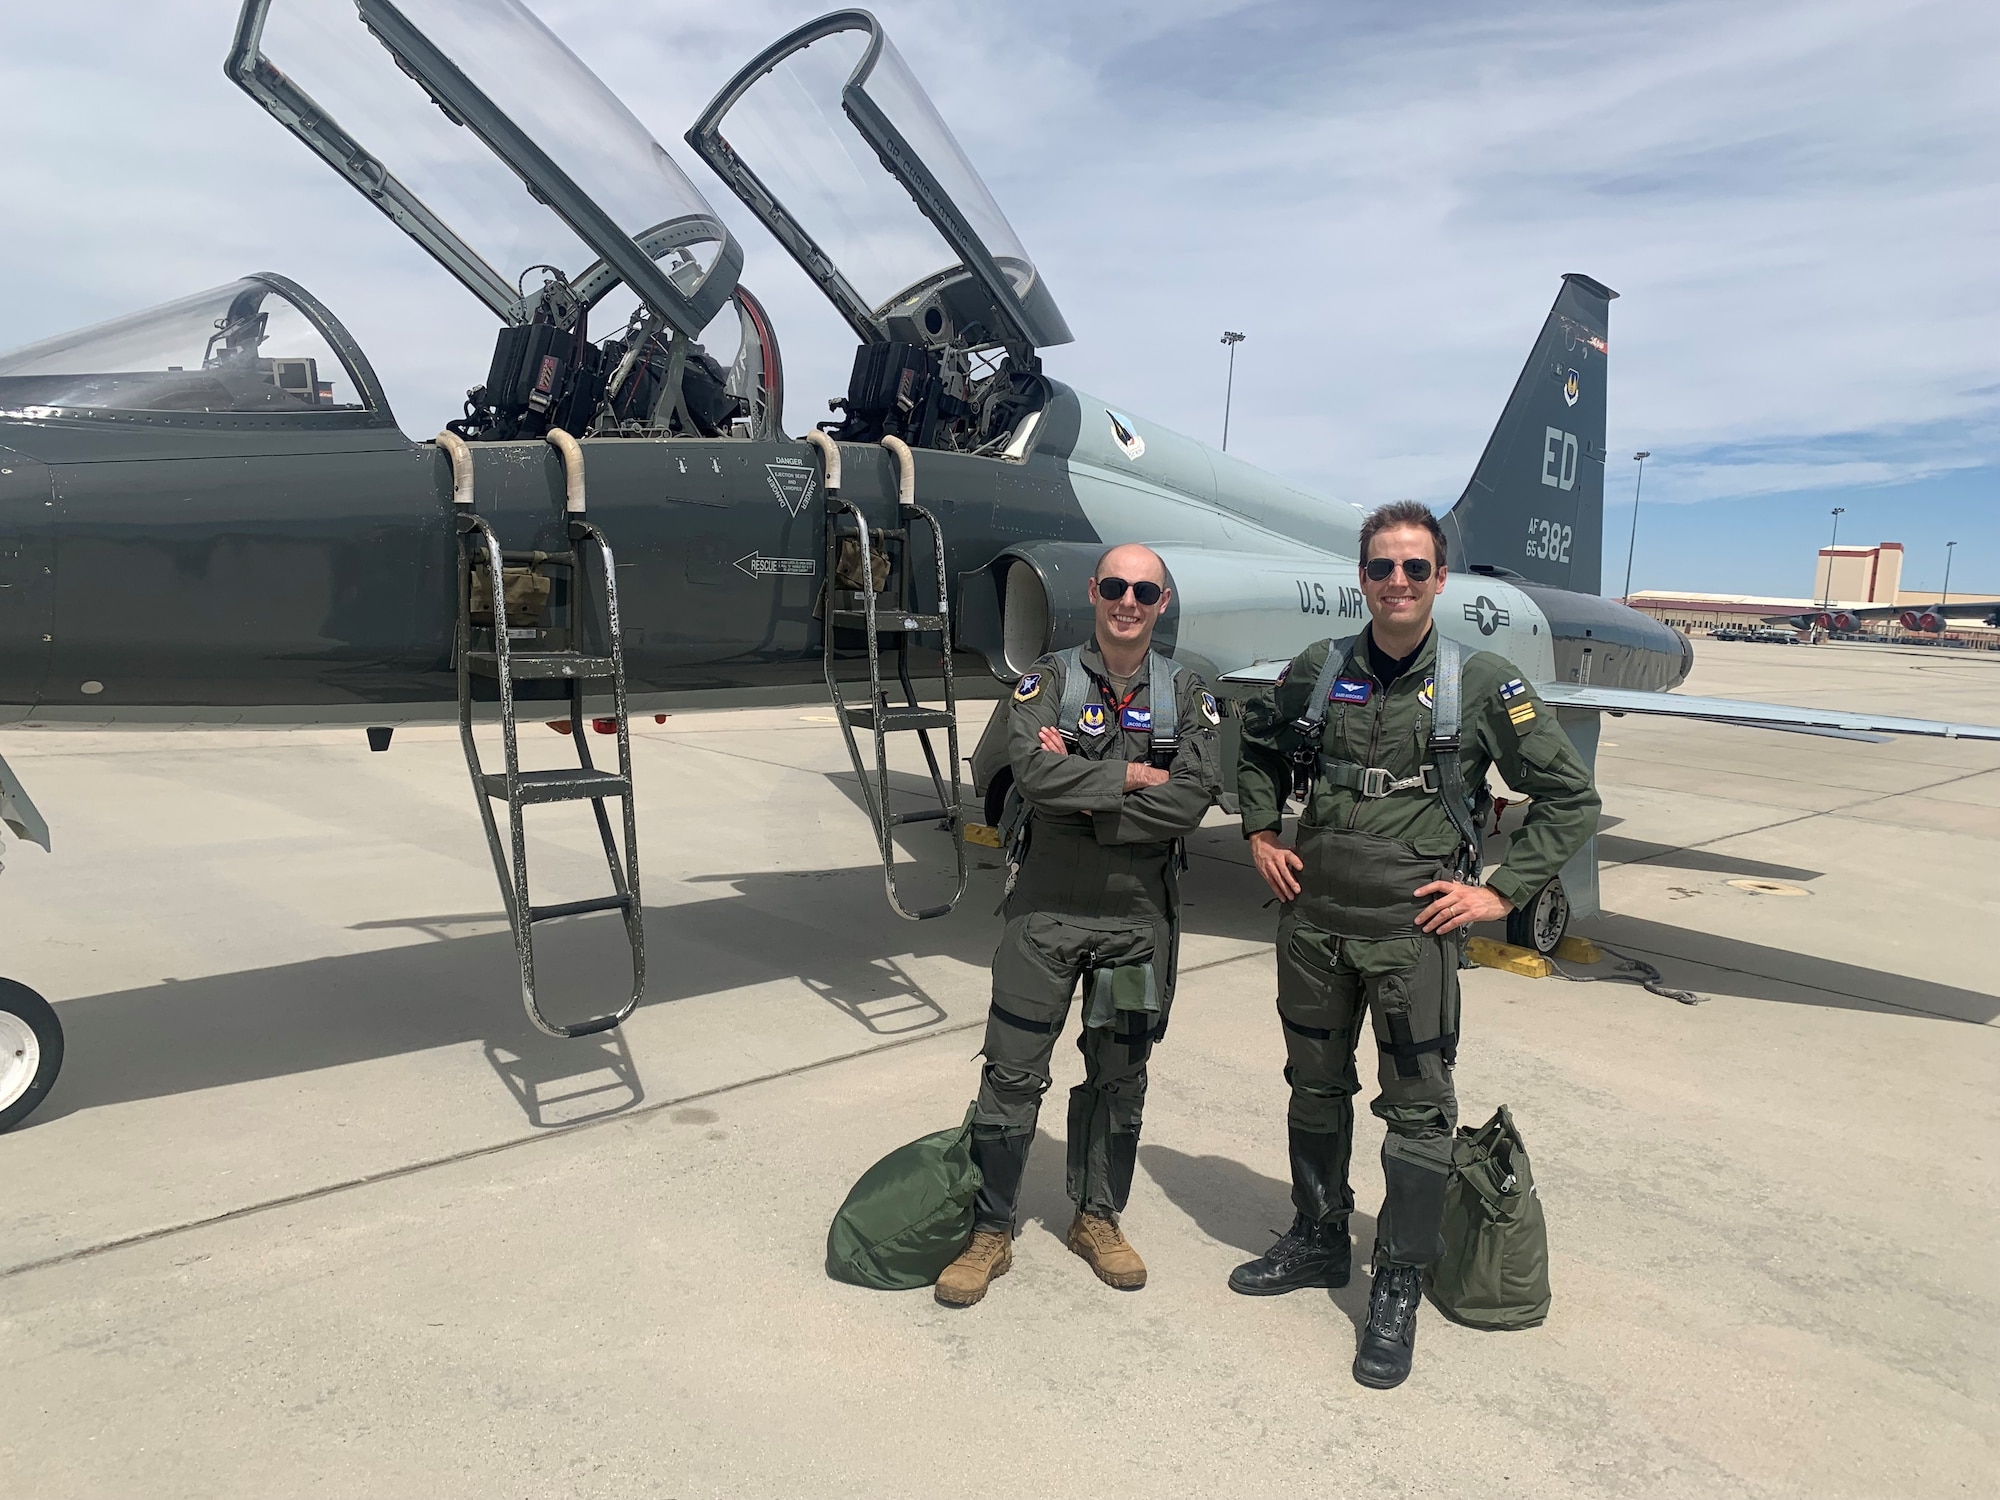 U.S. Air Force Test Pilot School Class 23A students Capt. Sami Nisonen of the Finnish Air Force and Capt. Jacob Olsen of the USAF pose for a photo after flying a T-38 Talon. This technical exchange at TPS develops long lasting individual friendships between the USAF students and their foreign partner classmates.